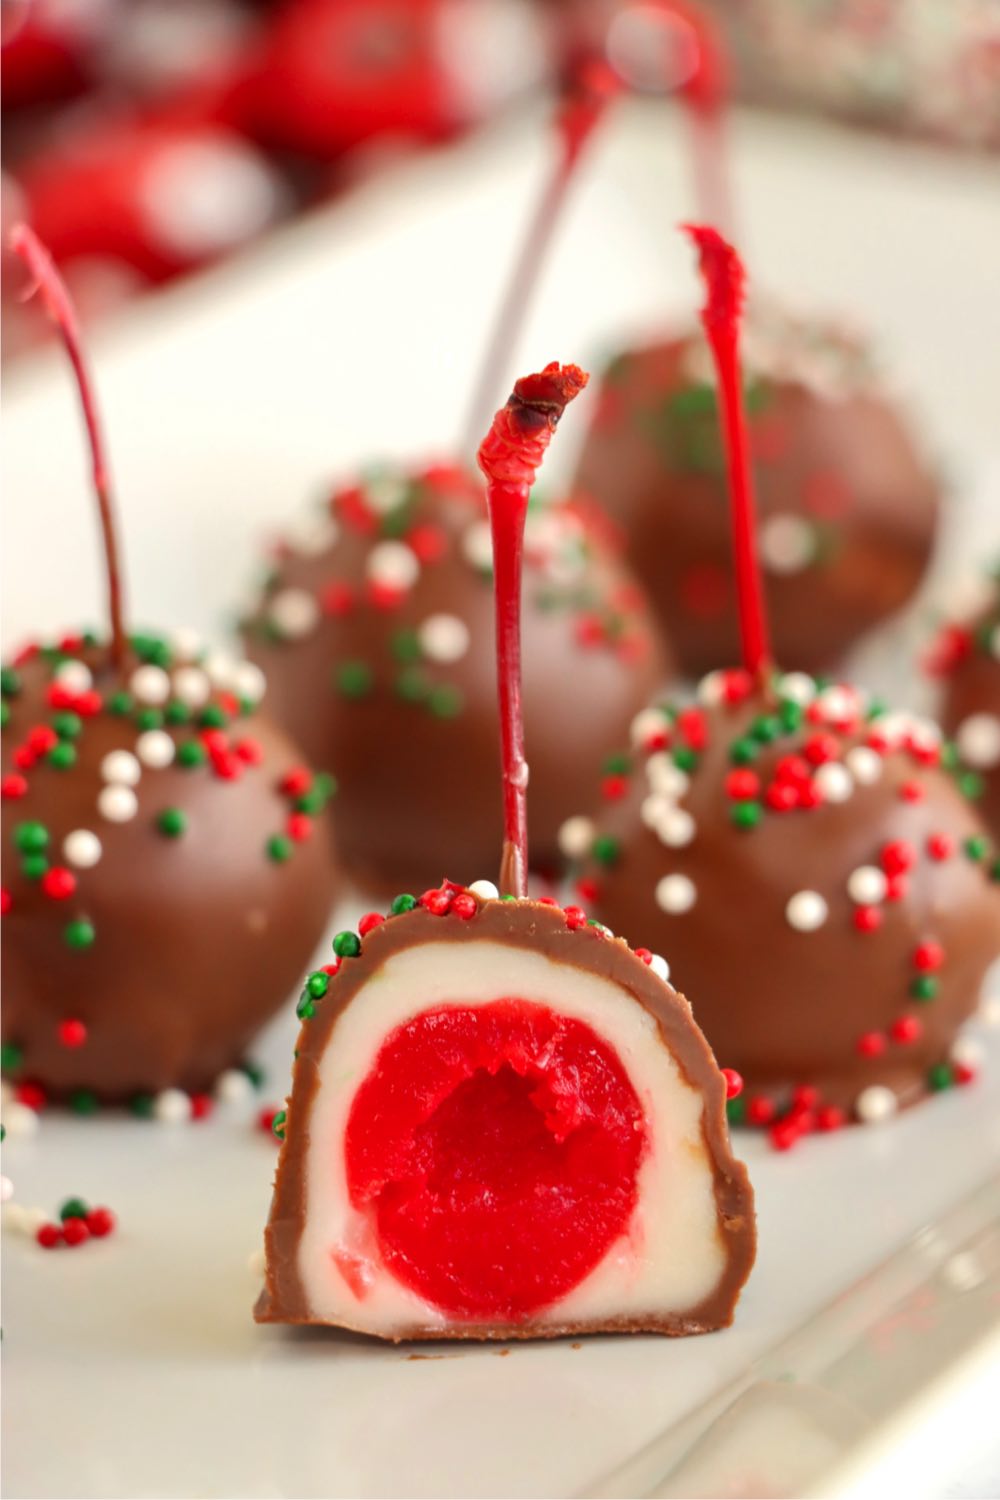 View of the center of a chocolate covered cherry